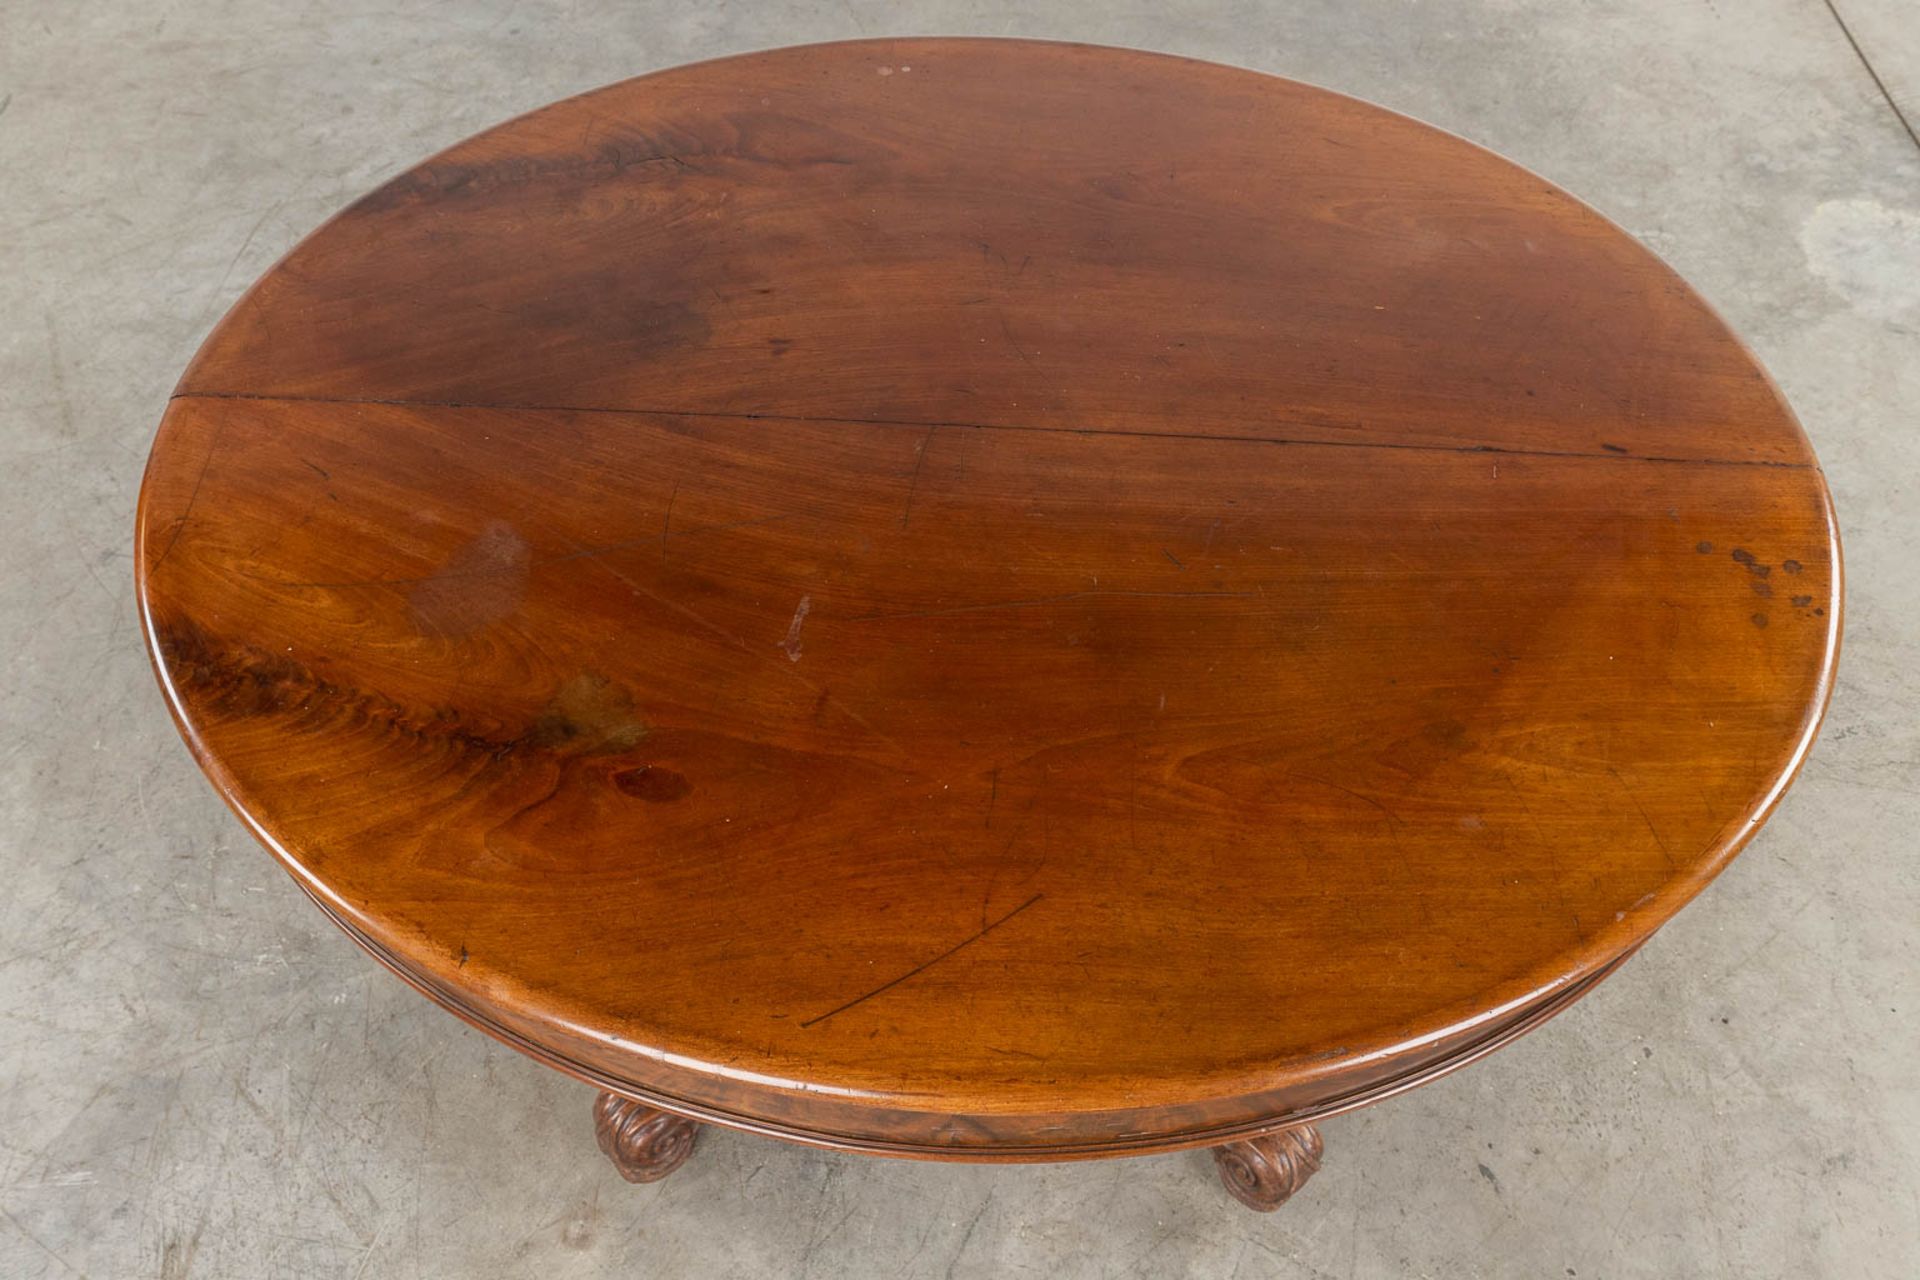 An atique oval table, Lous Philippe. (D:120 x W:139 x H:74 cm) - Image 9 of 9